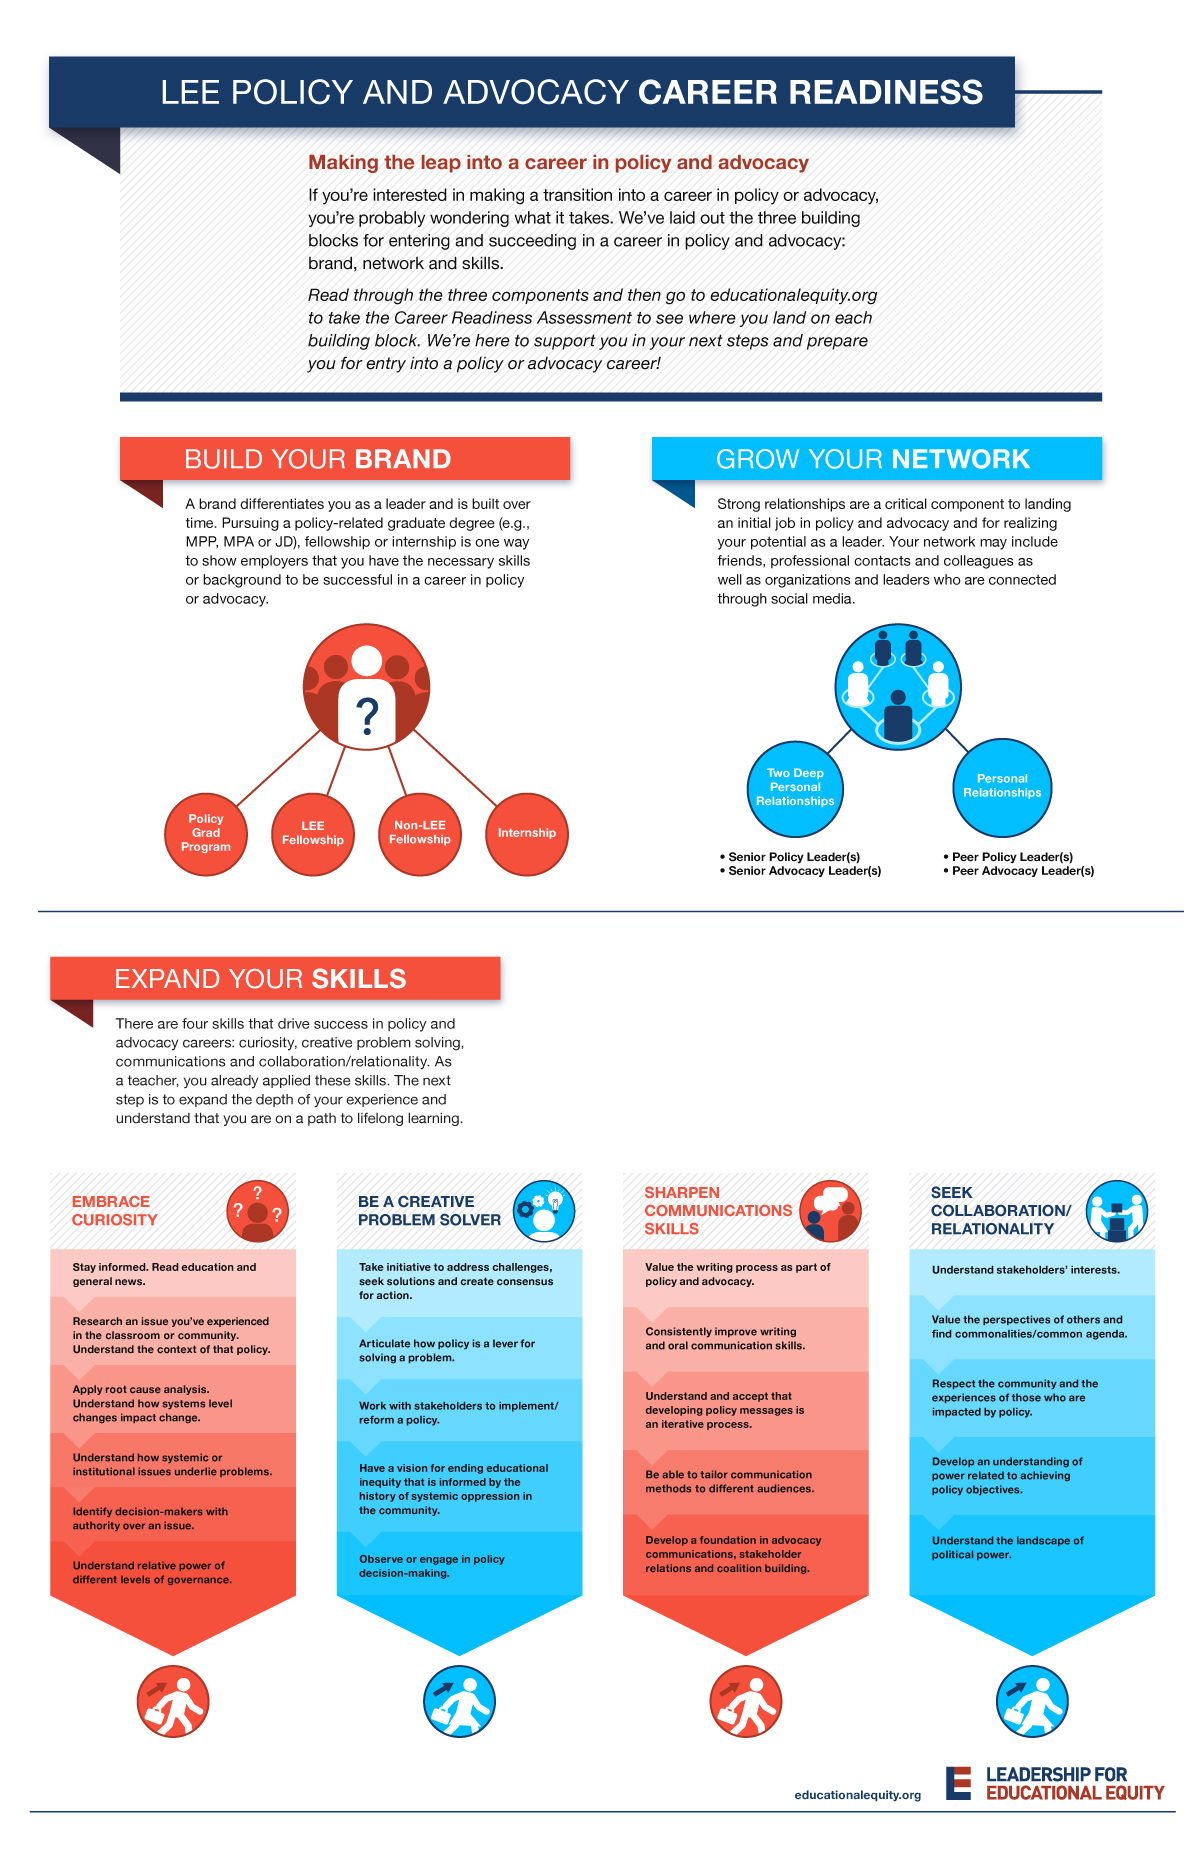 Infographic outlining LEE Policy and Advocacy Career Readiness steps, with sections on building your brand, growing your network, and expanding your skills. Icons and bullet points detail strategies for educational equity leadership development.